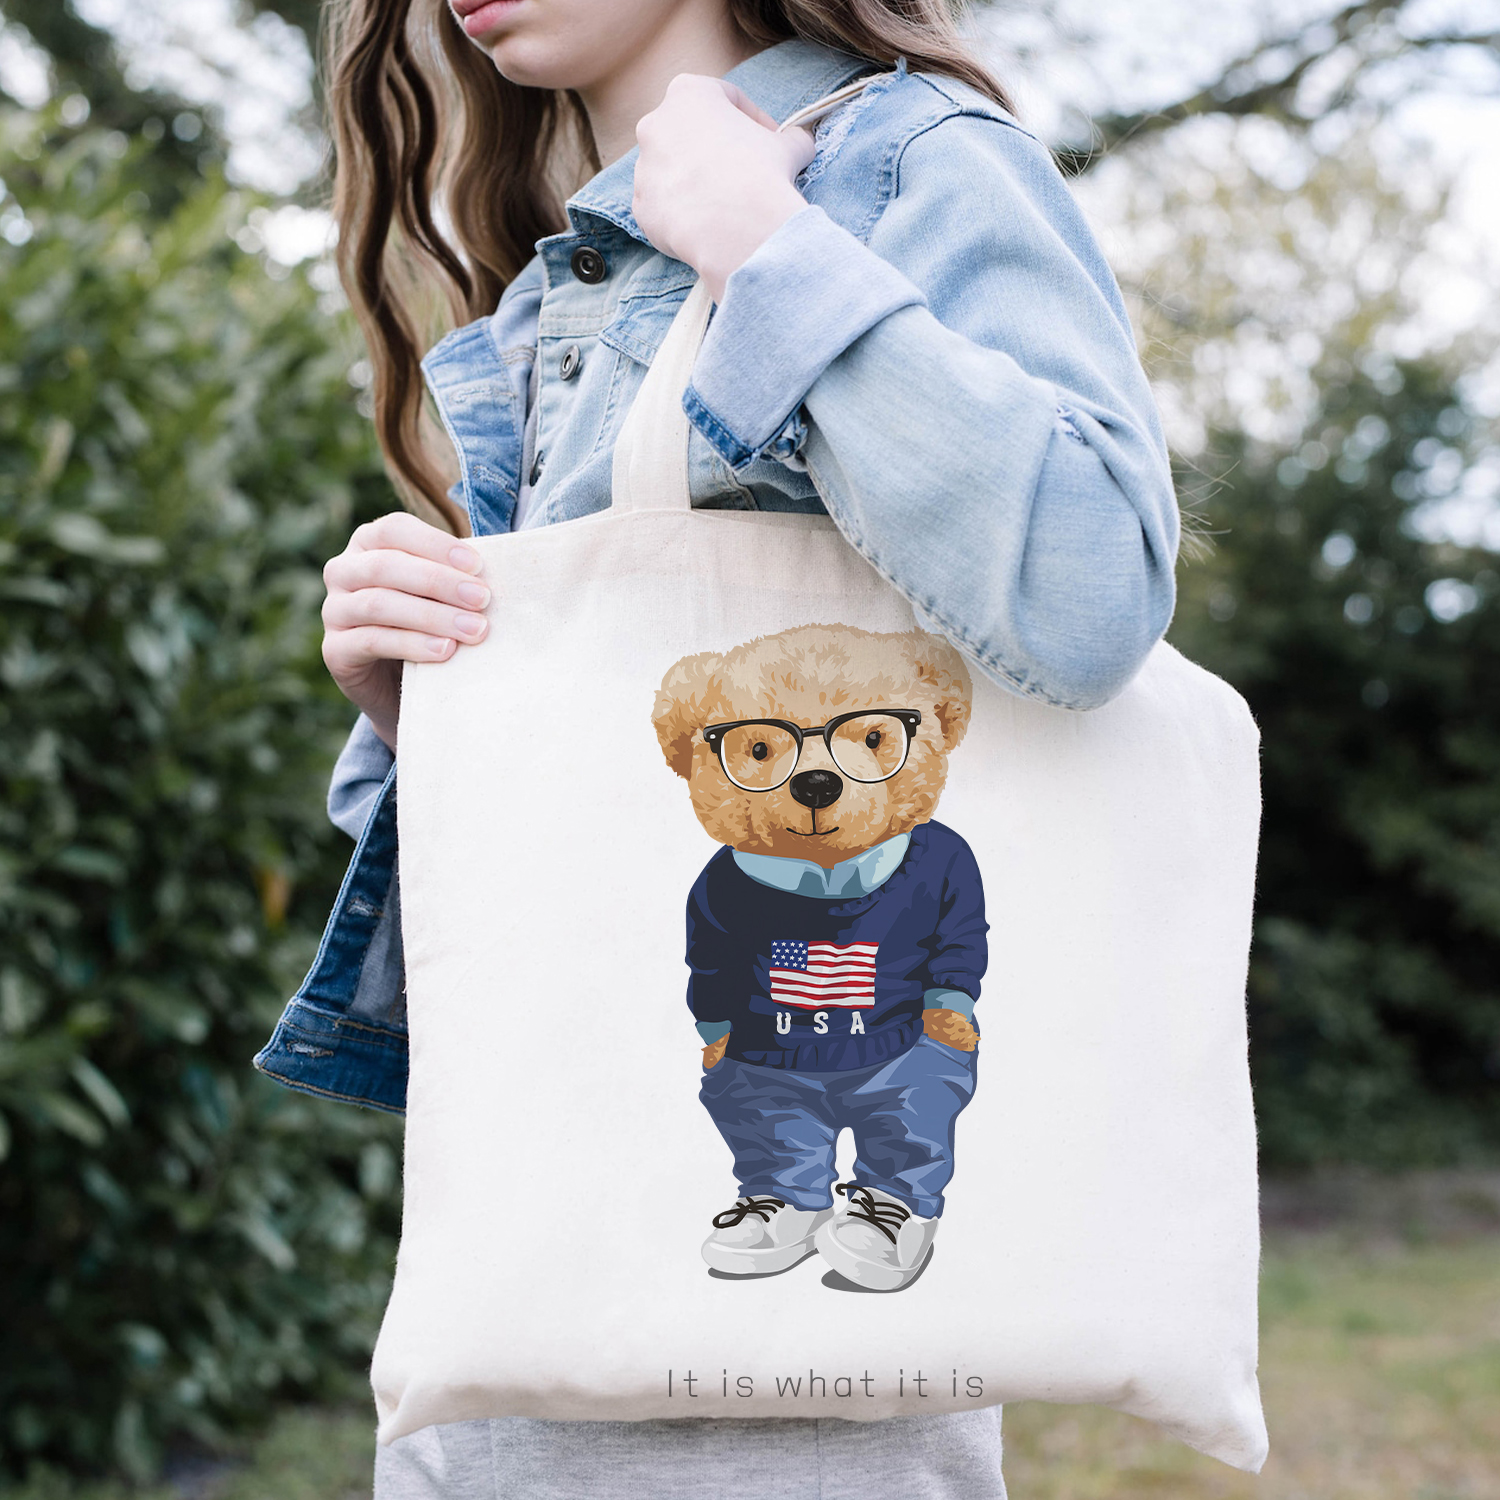 Polo Ralph Lauren tote bag in navy with bear logo